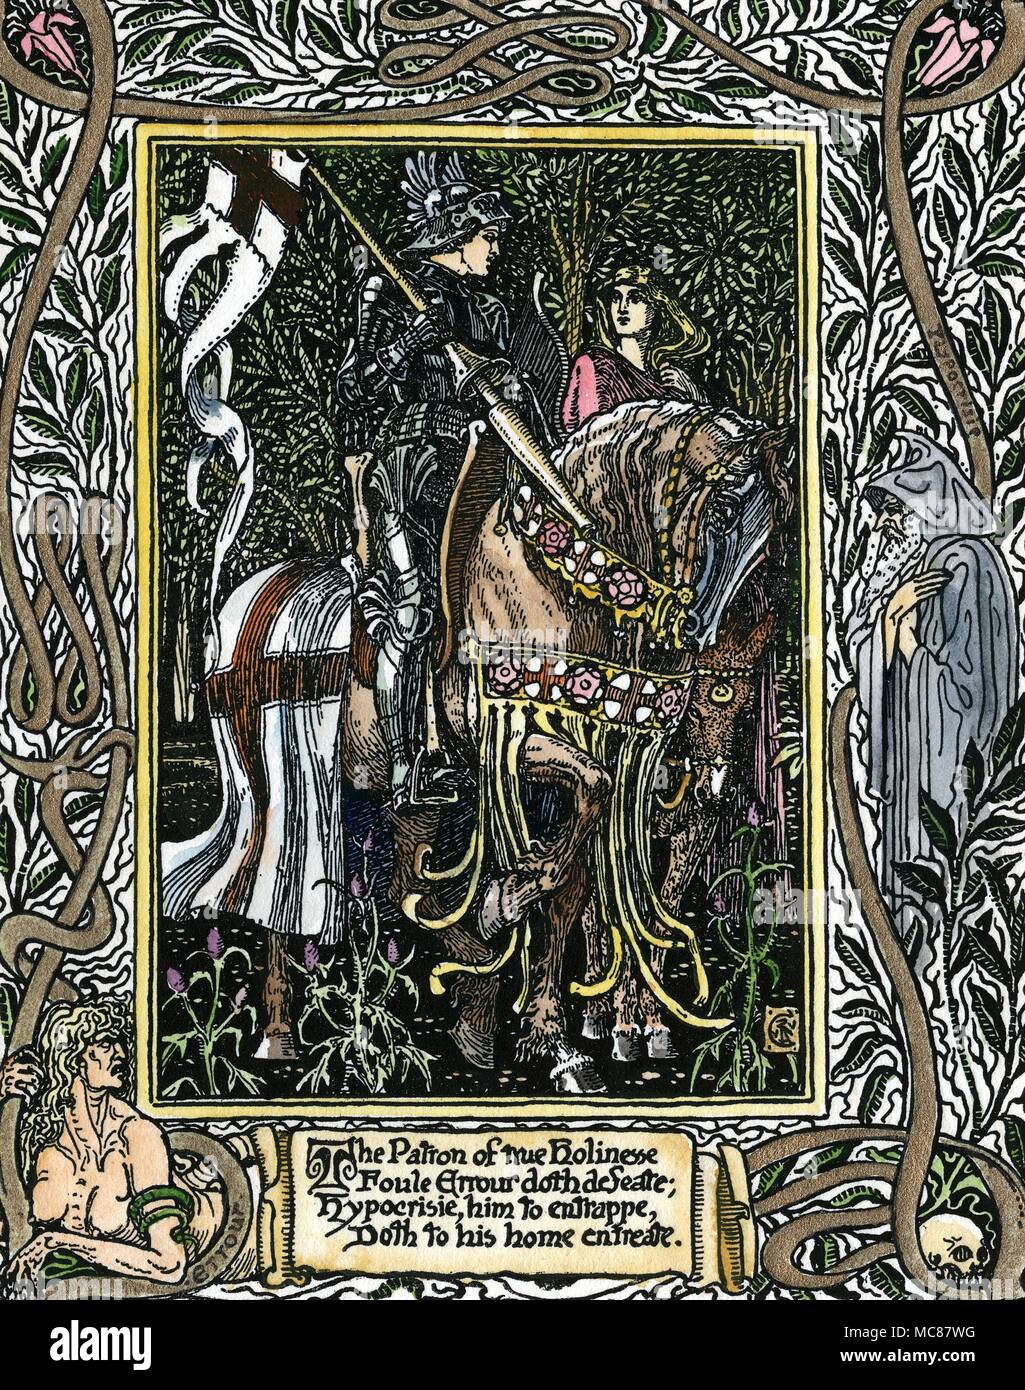 Knight from Fairie Queene 'The patron of true Holiness / Foue Errour doth deSeate....' illustration by Walter Crane for the first book of The Faerie Queene c 1899 Stock Photo